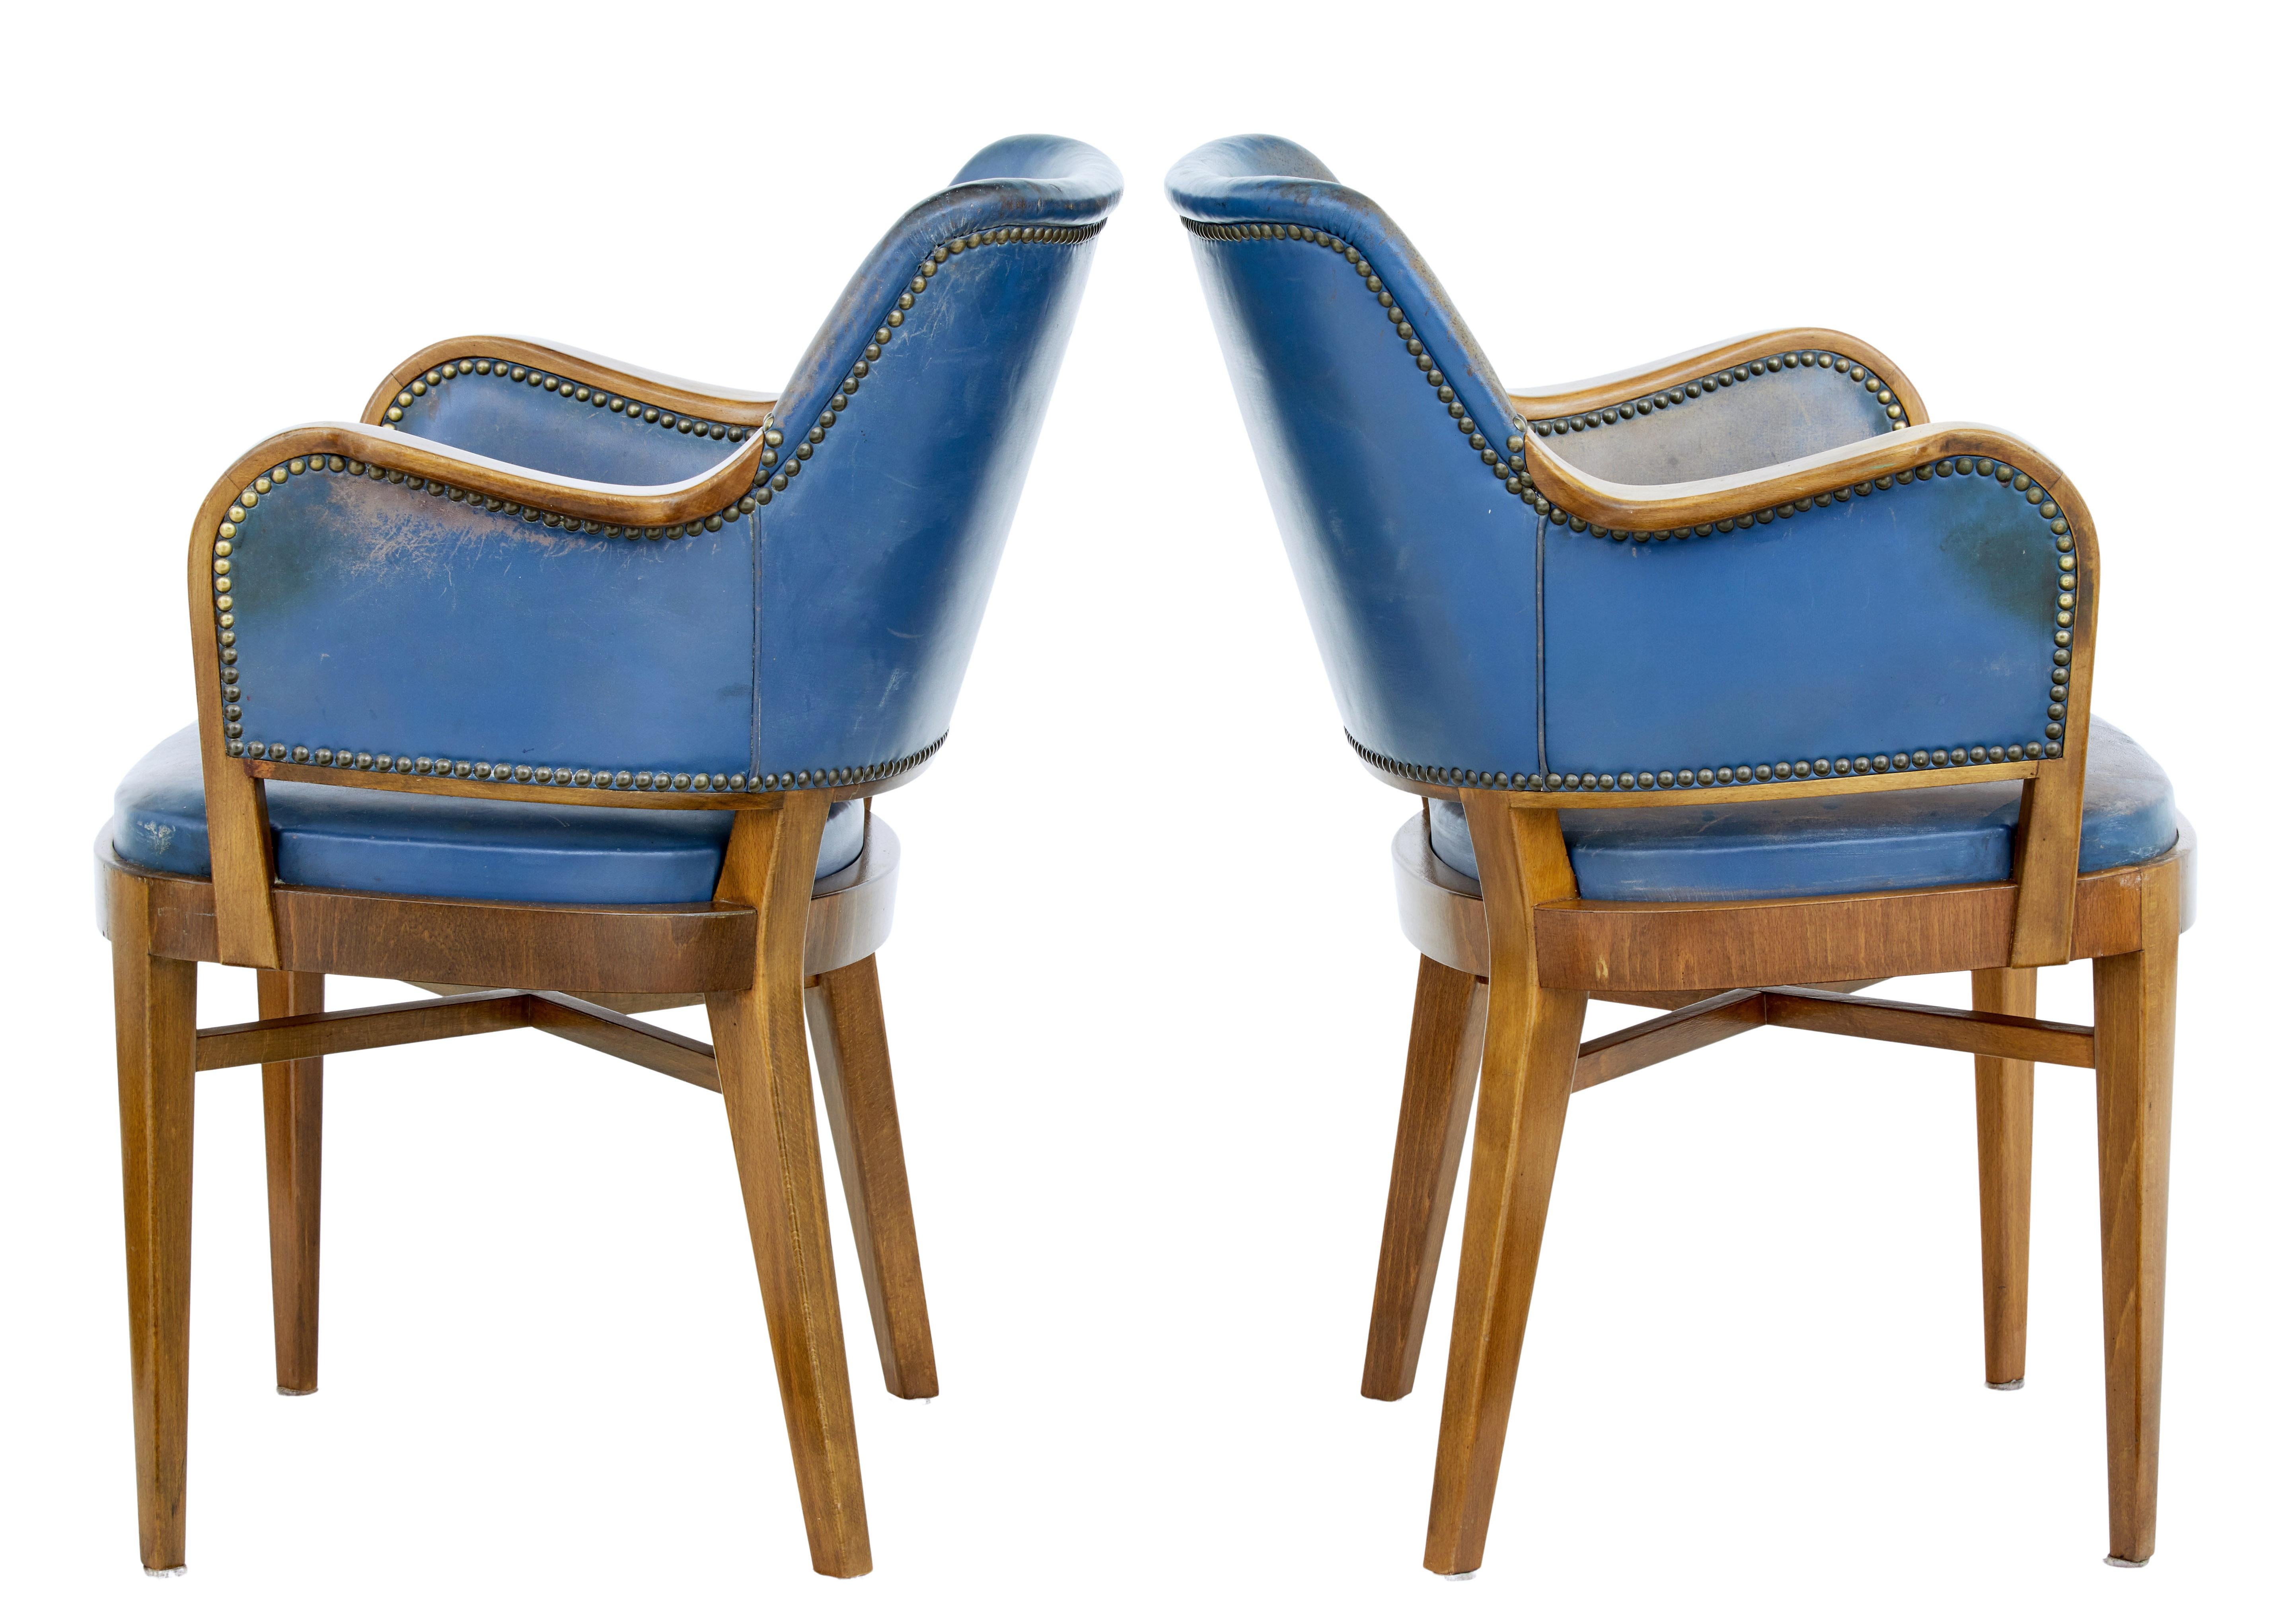 Pair of mid-20th century teak and leather armchairs circa 1950.

Very comfortable pair of Scandinavian armchairs. Shaped backs and made from teak that has been coloured to match walnut. Show frame arms and original leather covering and stud work